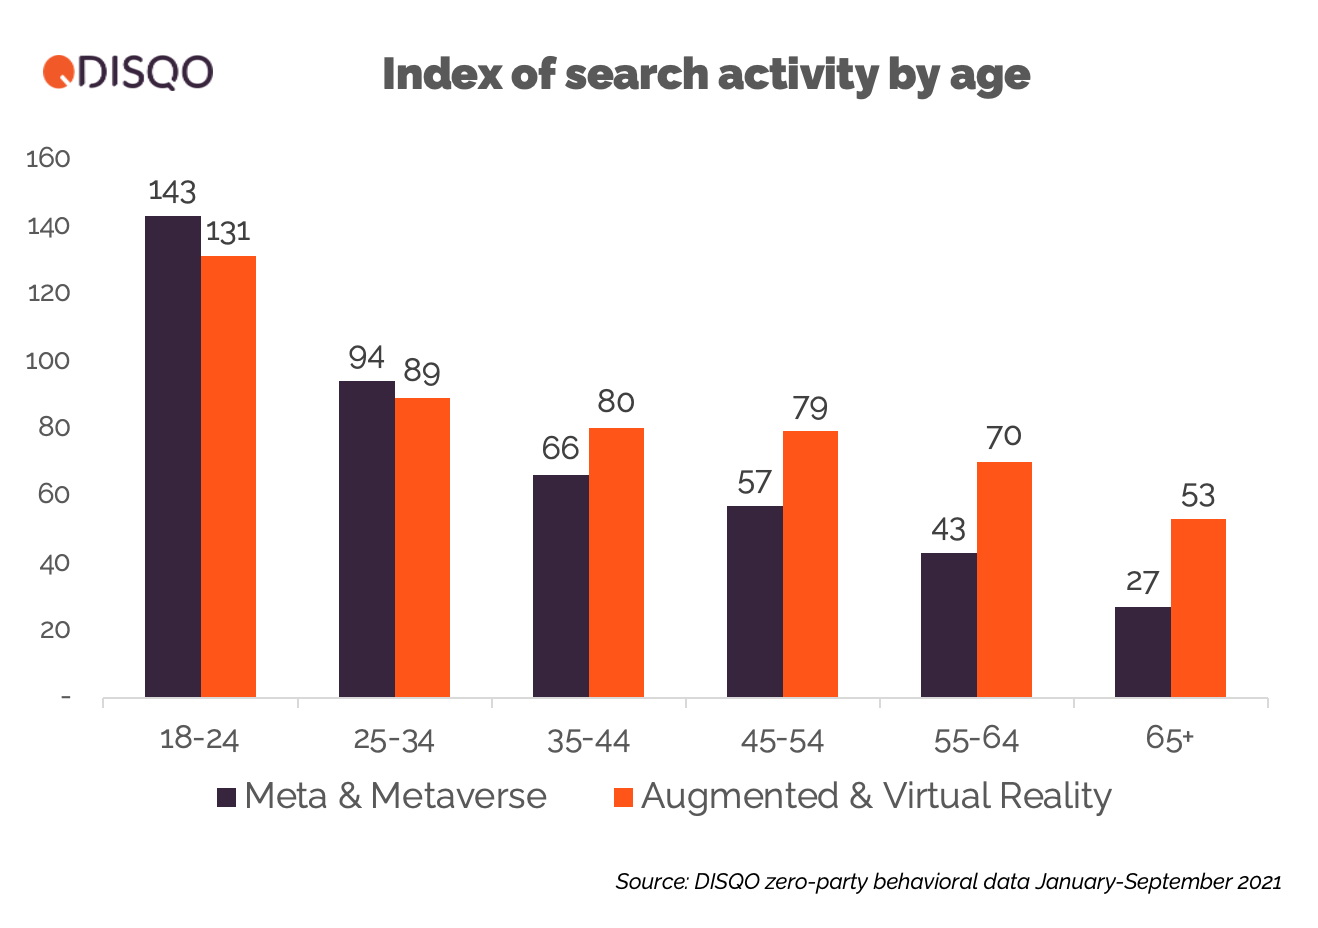 Index of search activity by age bar graph